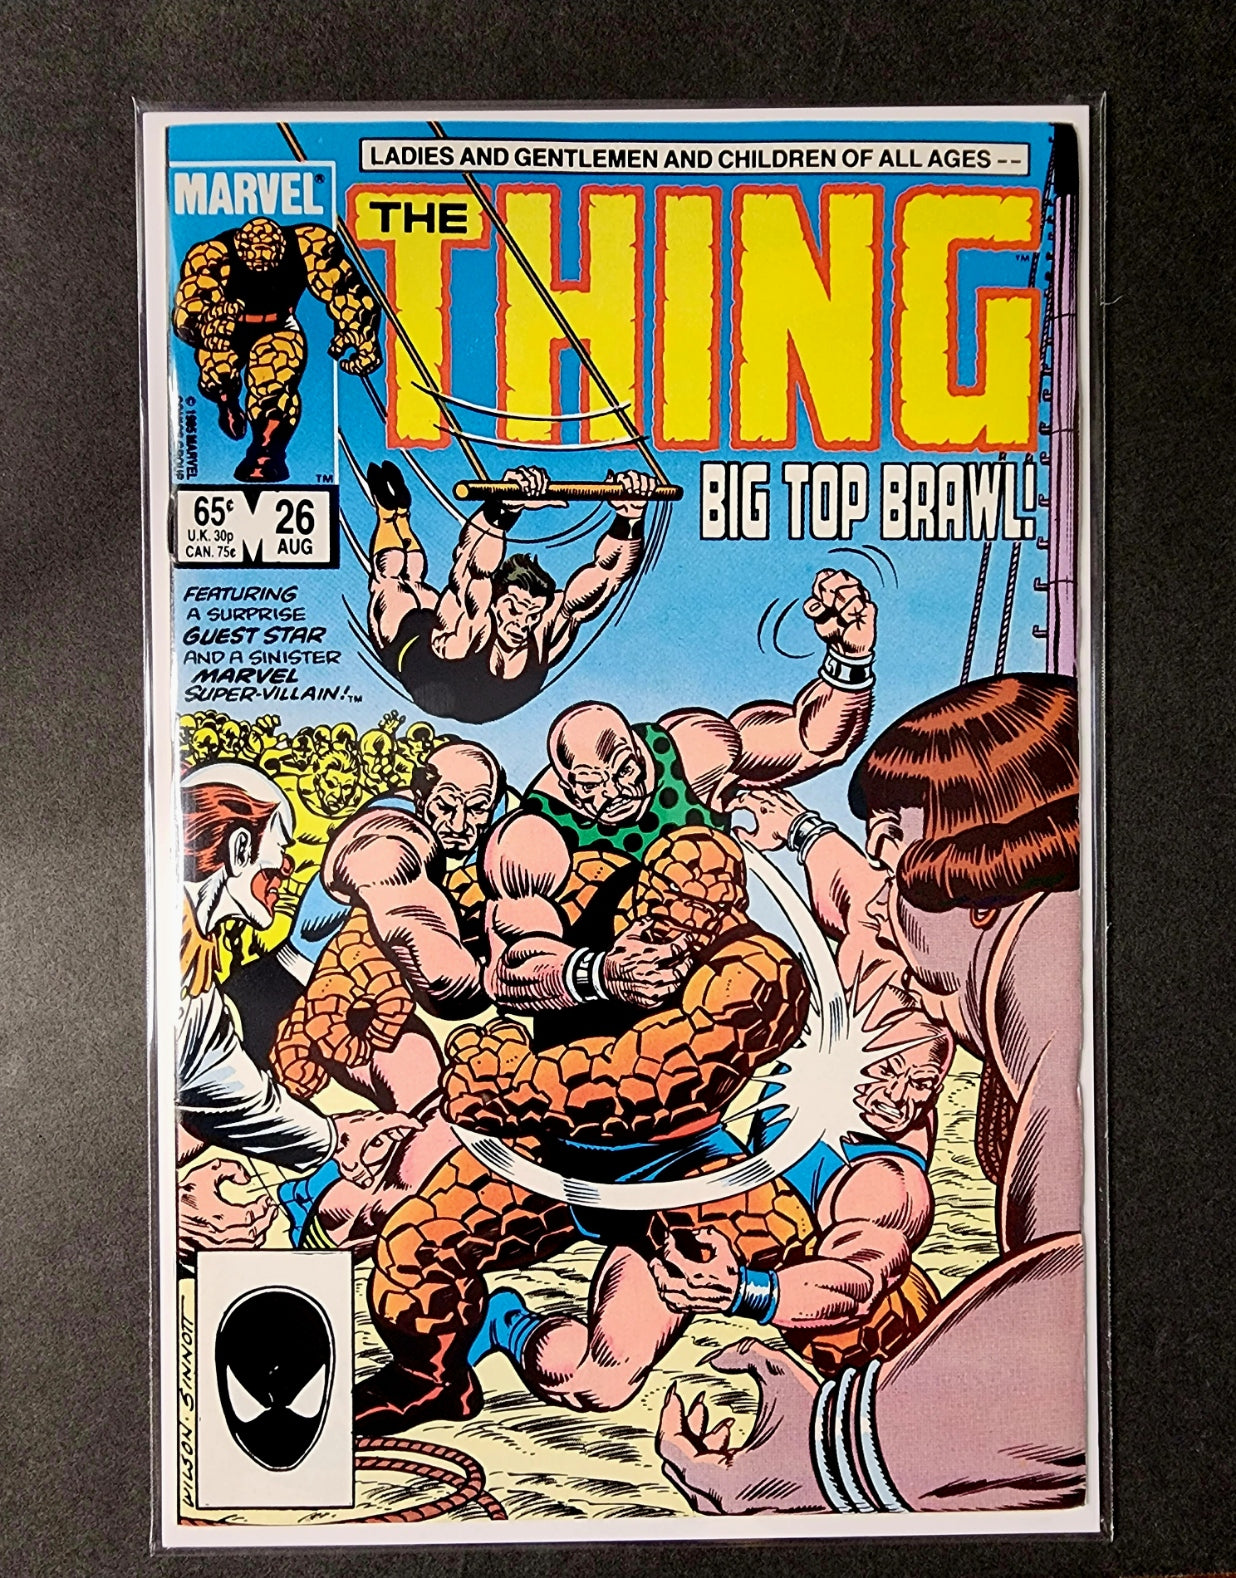 The Thing #26 (VF)